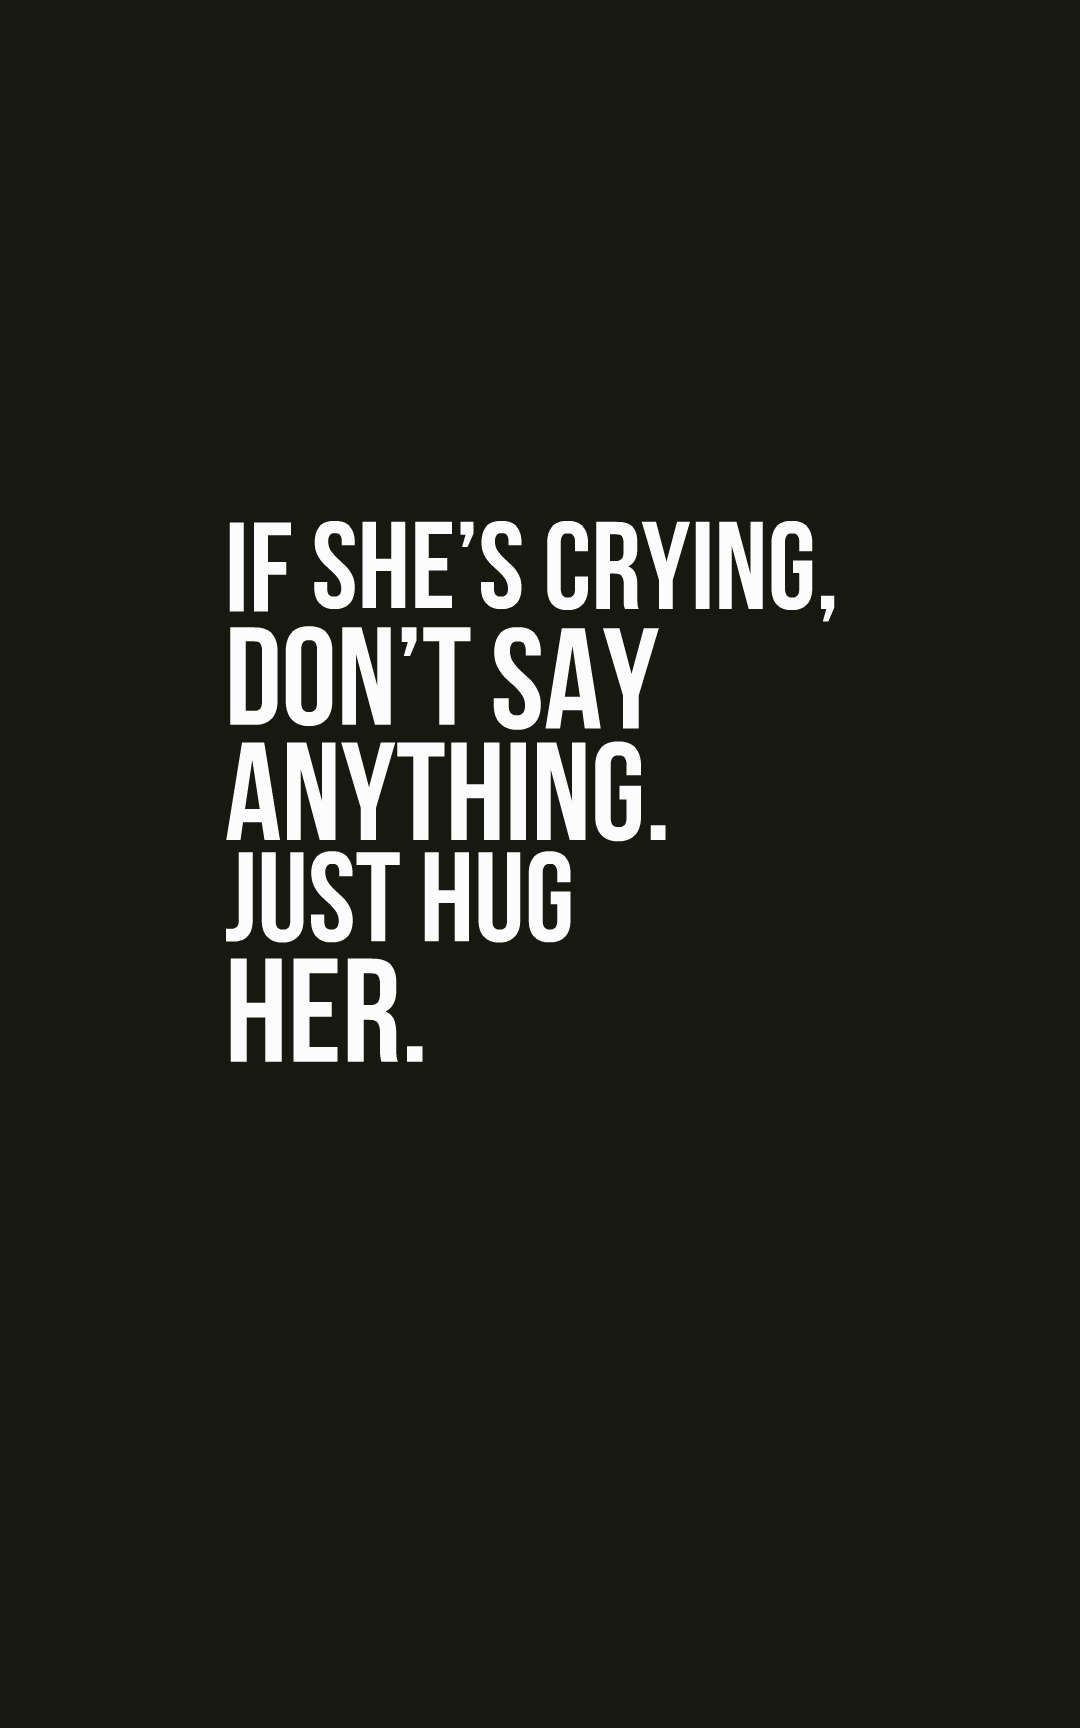 If she’s crying, don’t say anything. Just hug her.